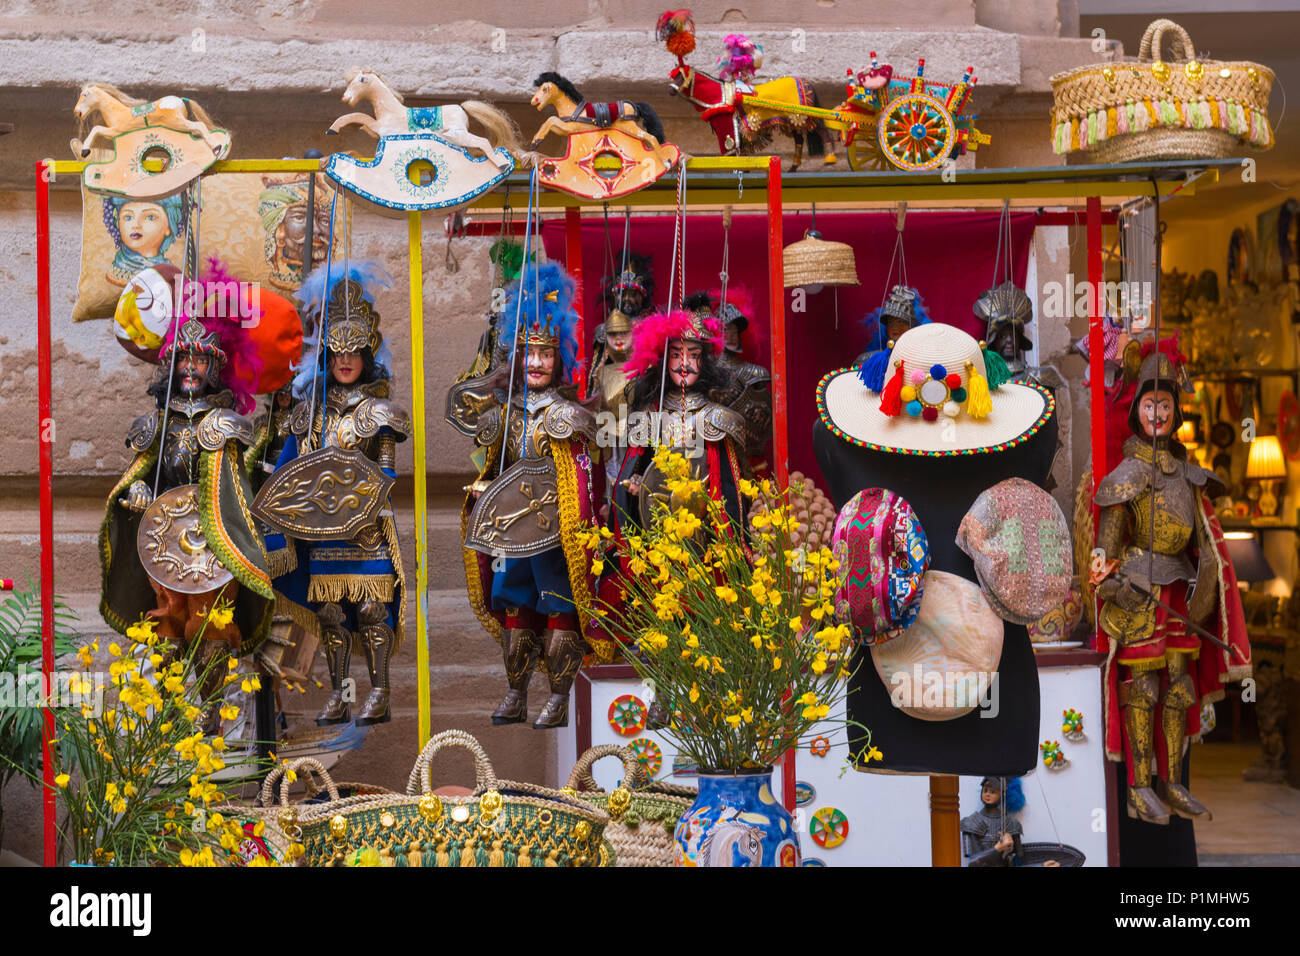 Italy Sicily Palermo street scene shop store pavement sidewalk display typical string puppets old military uniforms hats small rocking horses Stock Photo